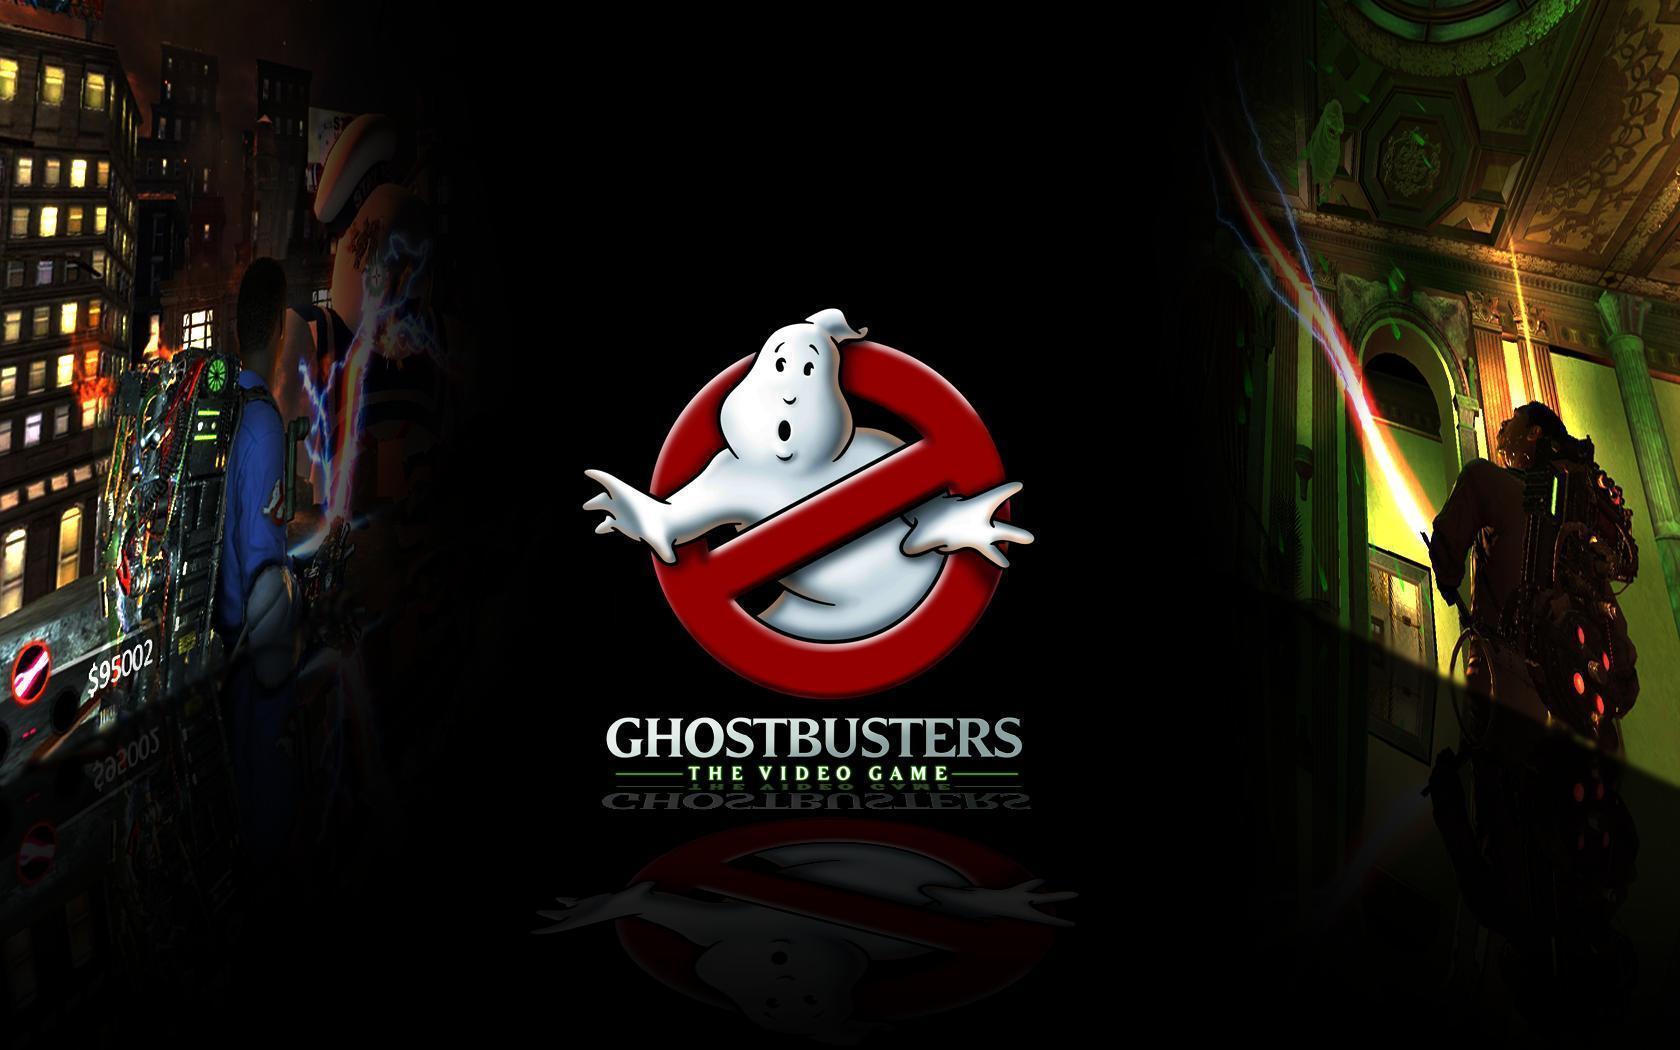 Ghostbusters Video Game Desk 4K Wallpapers